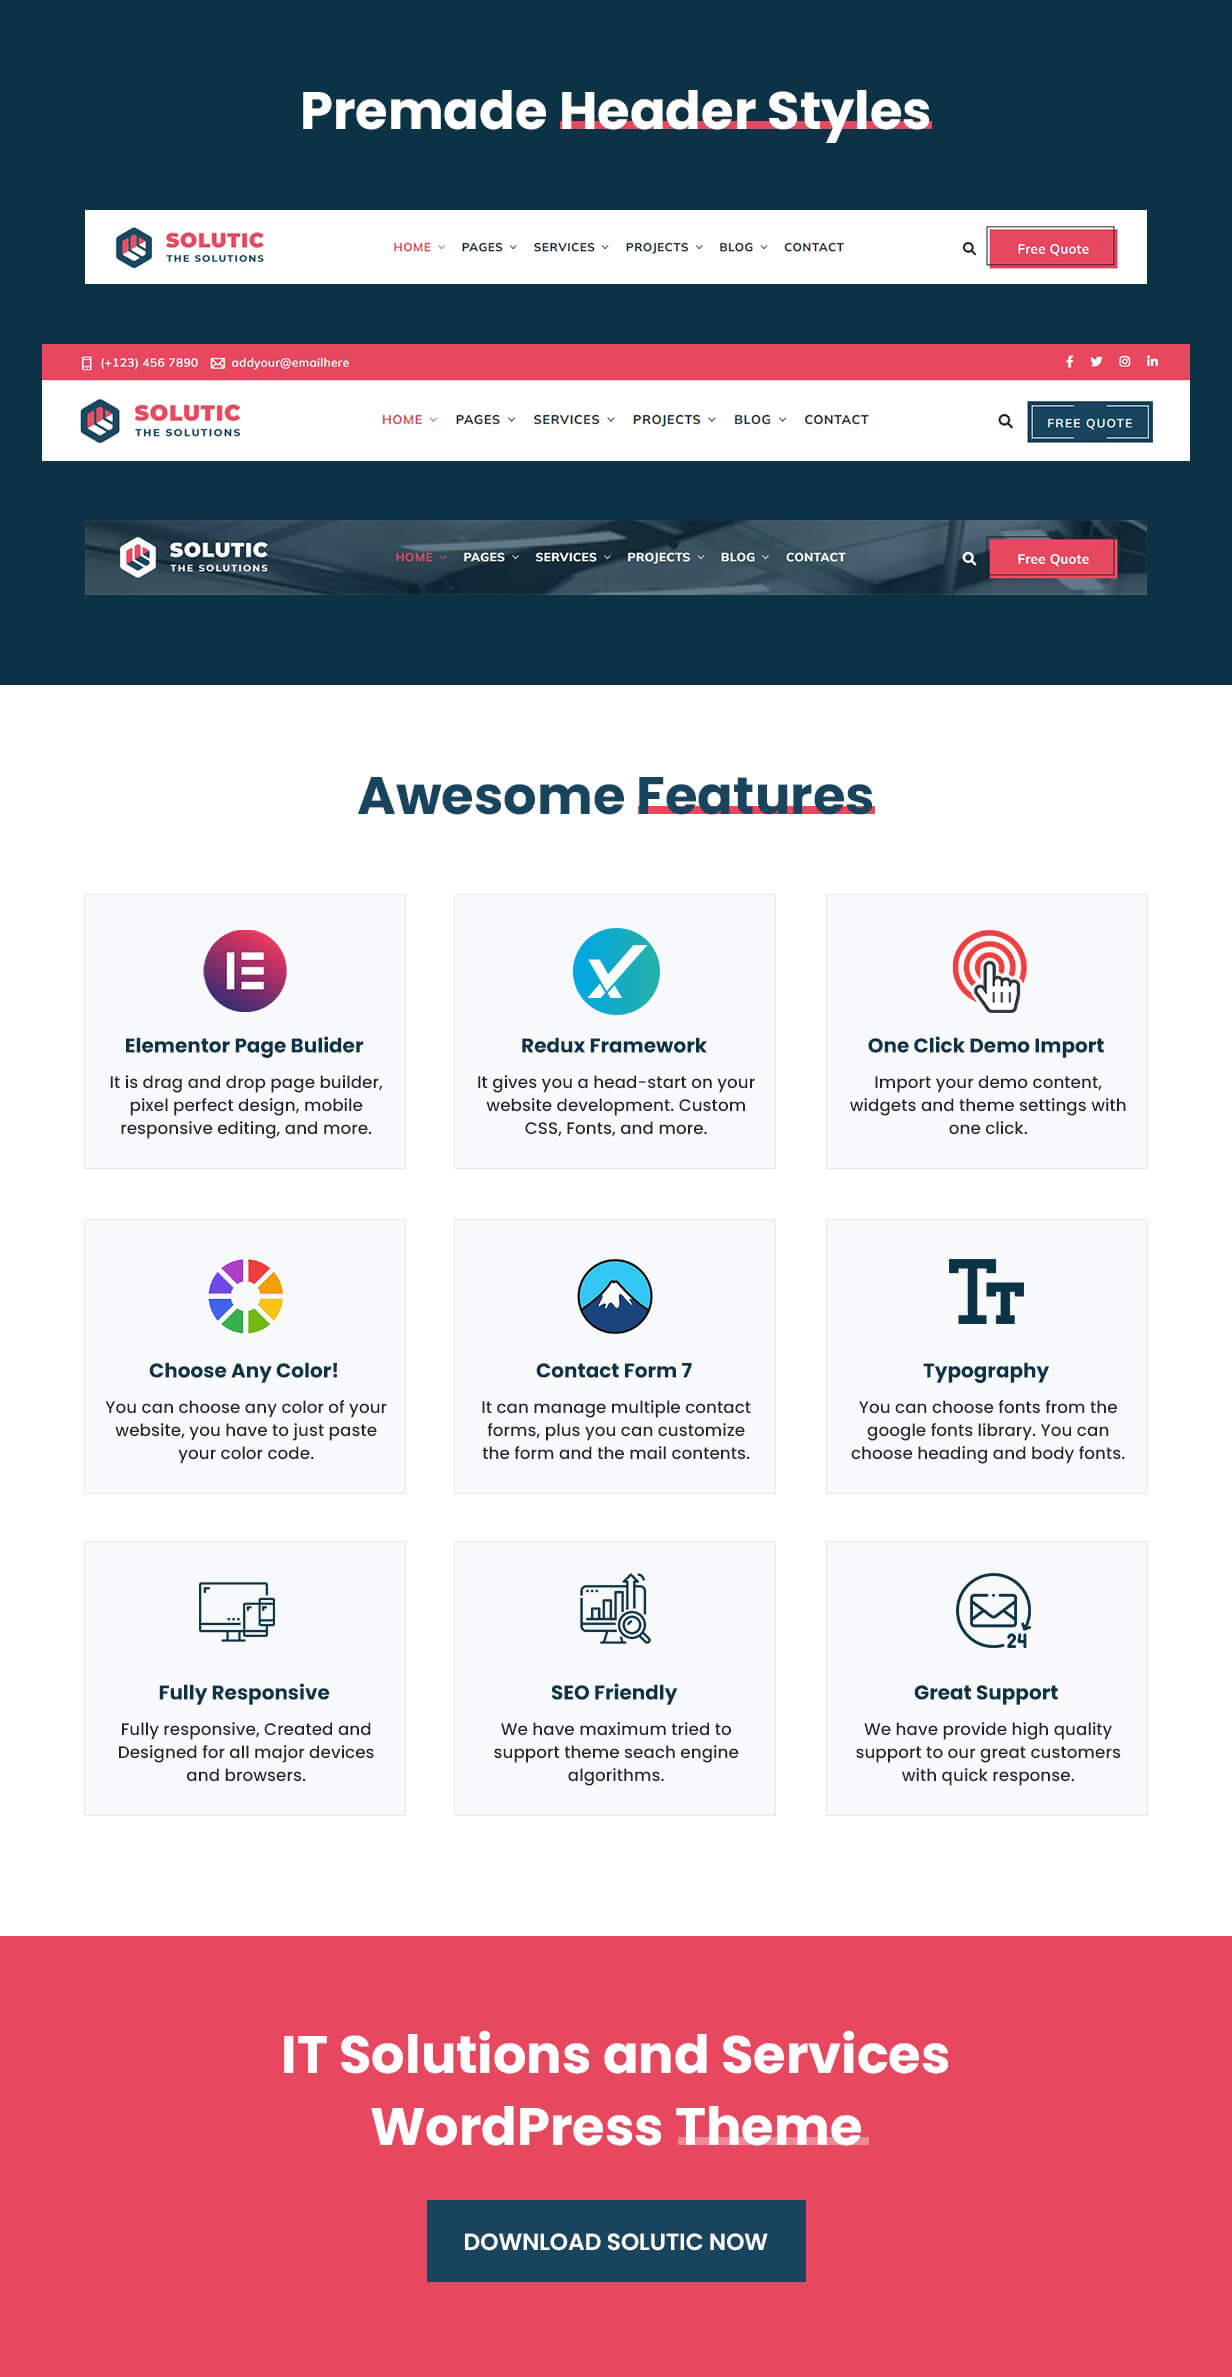 It Solutions and Services WordPress Theme